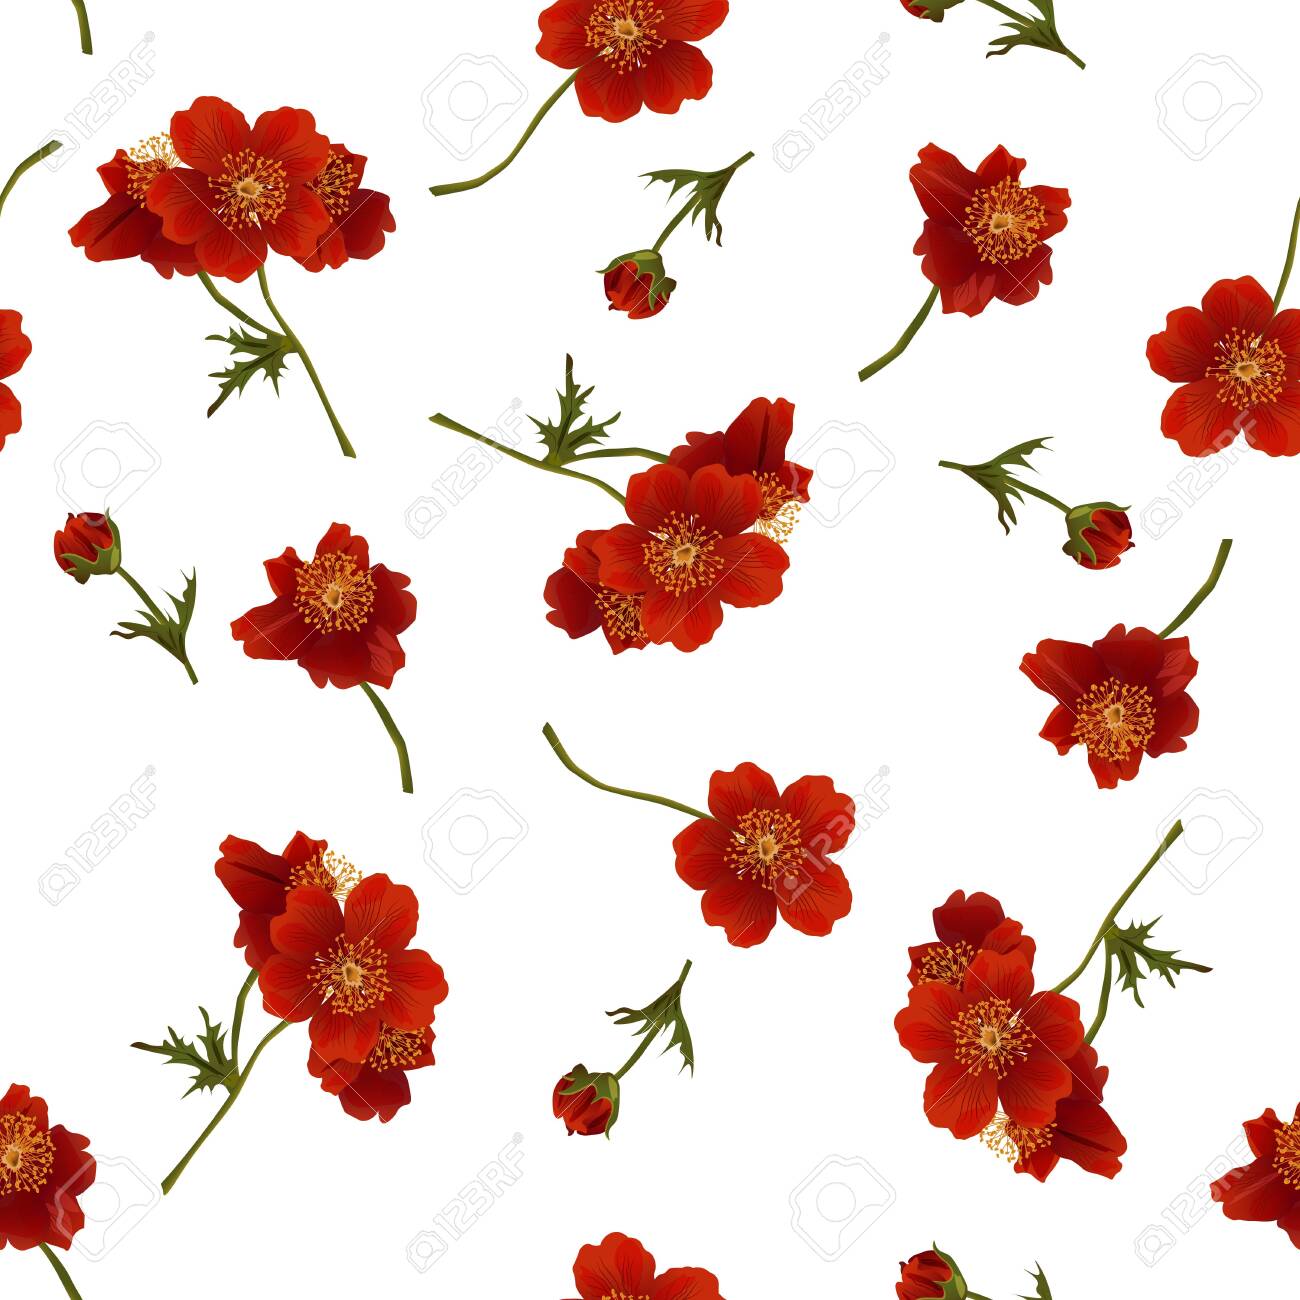 Vector Seamless Pattern With Red Flowers On White Modern Floral